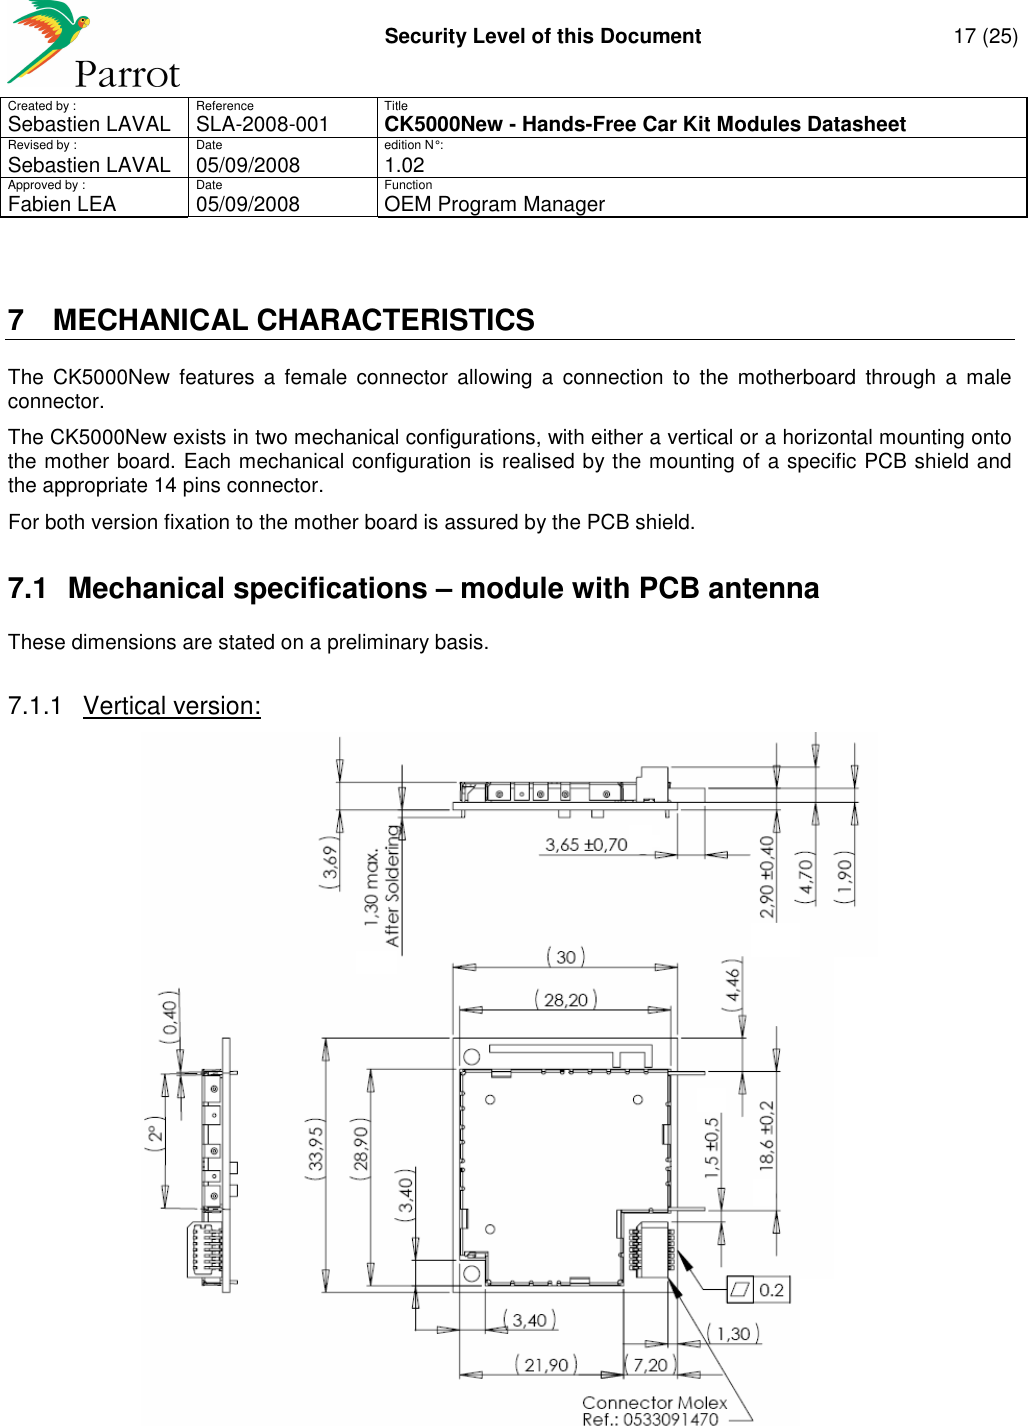     Security Level of this Document  17 (25) Created by :  Reference  Title Sebastien LAVAL   SLA-2008-001 CK5000New - Hands-Free Car Kit Modules Datasheet Revised by :  Date  edition N° : Sebastien LAVAL  05/09/2008  1.02 Approved by :  Date  Function     Fabien LEA  05/09/2008  OEM Program Manager   7  MECHANICAL CHARACTERISTICS The  CK5000New  features  a  female  connector  allowing  a  connection  to  the  motherboard  through  a  male connector. The CK5000New exists in two mechanical configurations, with either a vertical or a horizontal mounting onto the mother board. Each mechanical configuration is realised by the mounting of a specific PCB shield and the appropriate 14 pins connector. For both version fixation to the mother board is assured by the PCB shield.  7.1  Mechanical specifications – module with PCB antenna These dimensions are stated on a preliminary basis.  7.1.1  Vertical version:   